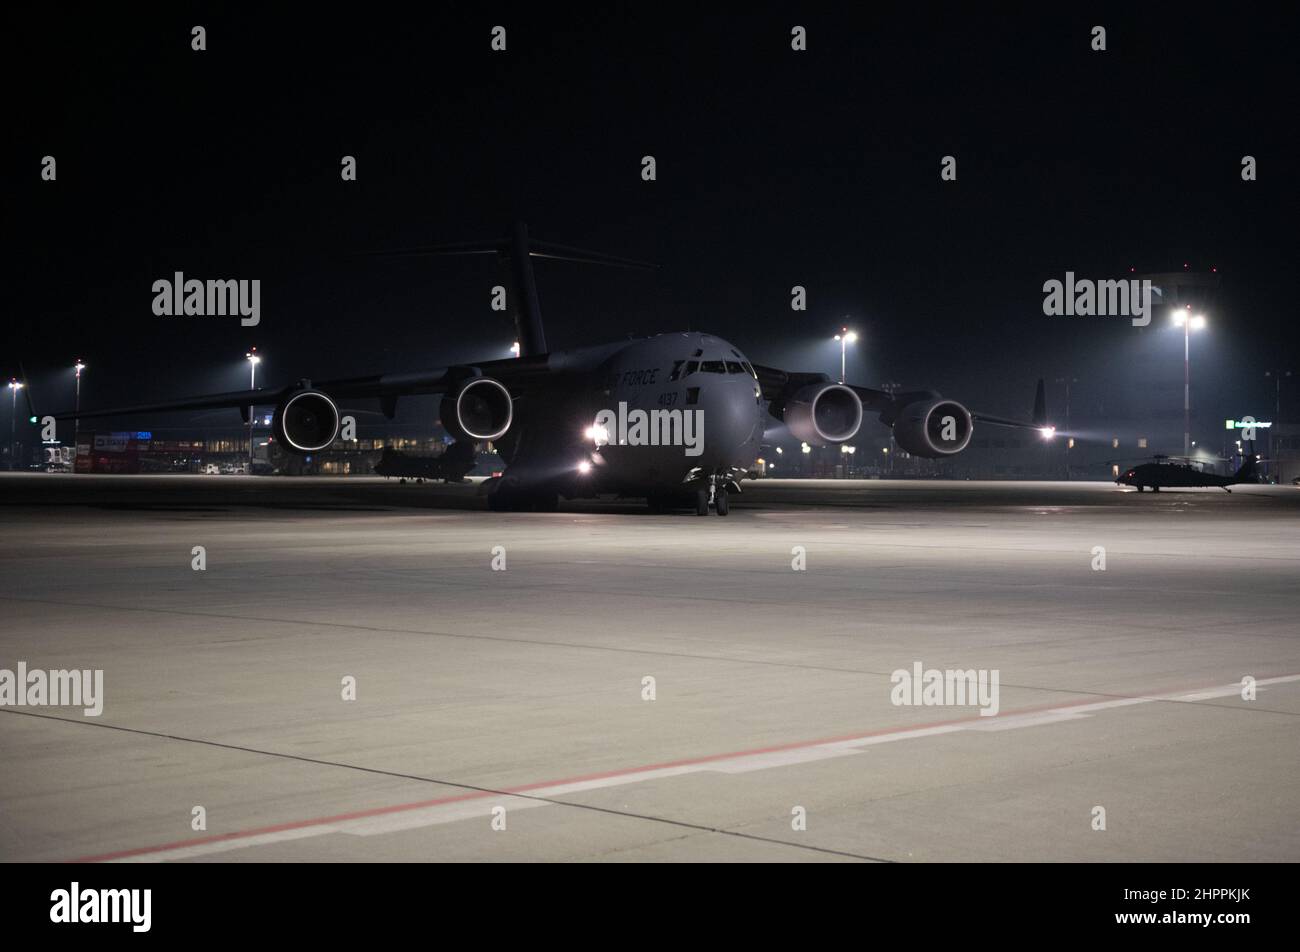 A U.S. Air Force C-17 Globemaster III taxis on the apron at Rzeszów–Jasionka Airport, Poland, Feb. 16, 2022. U.S. troops and cargo are downloaded from C-17 aircraft day and night in support of NATO Allies and partners. (U.S. Air Force photo by Capt. Kevyn Kaler) Stock Photo